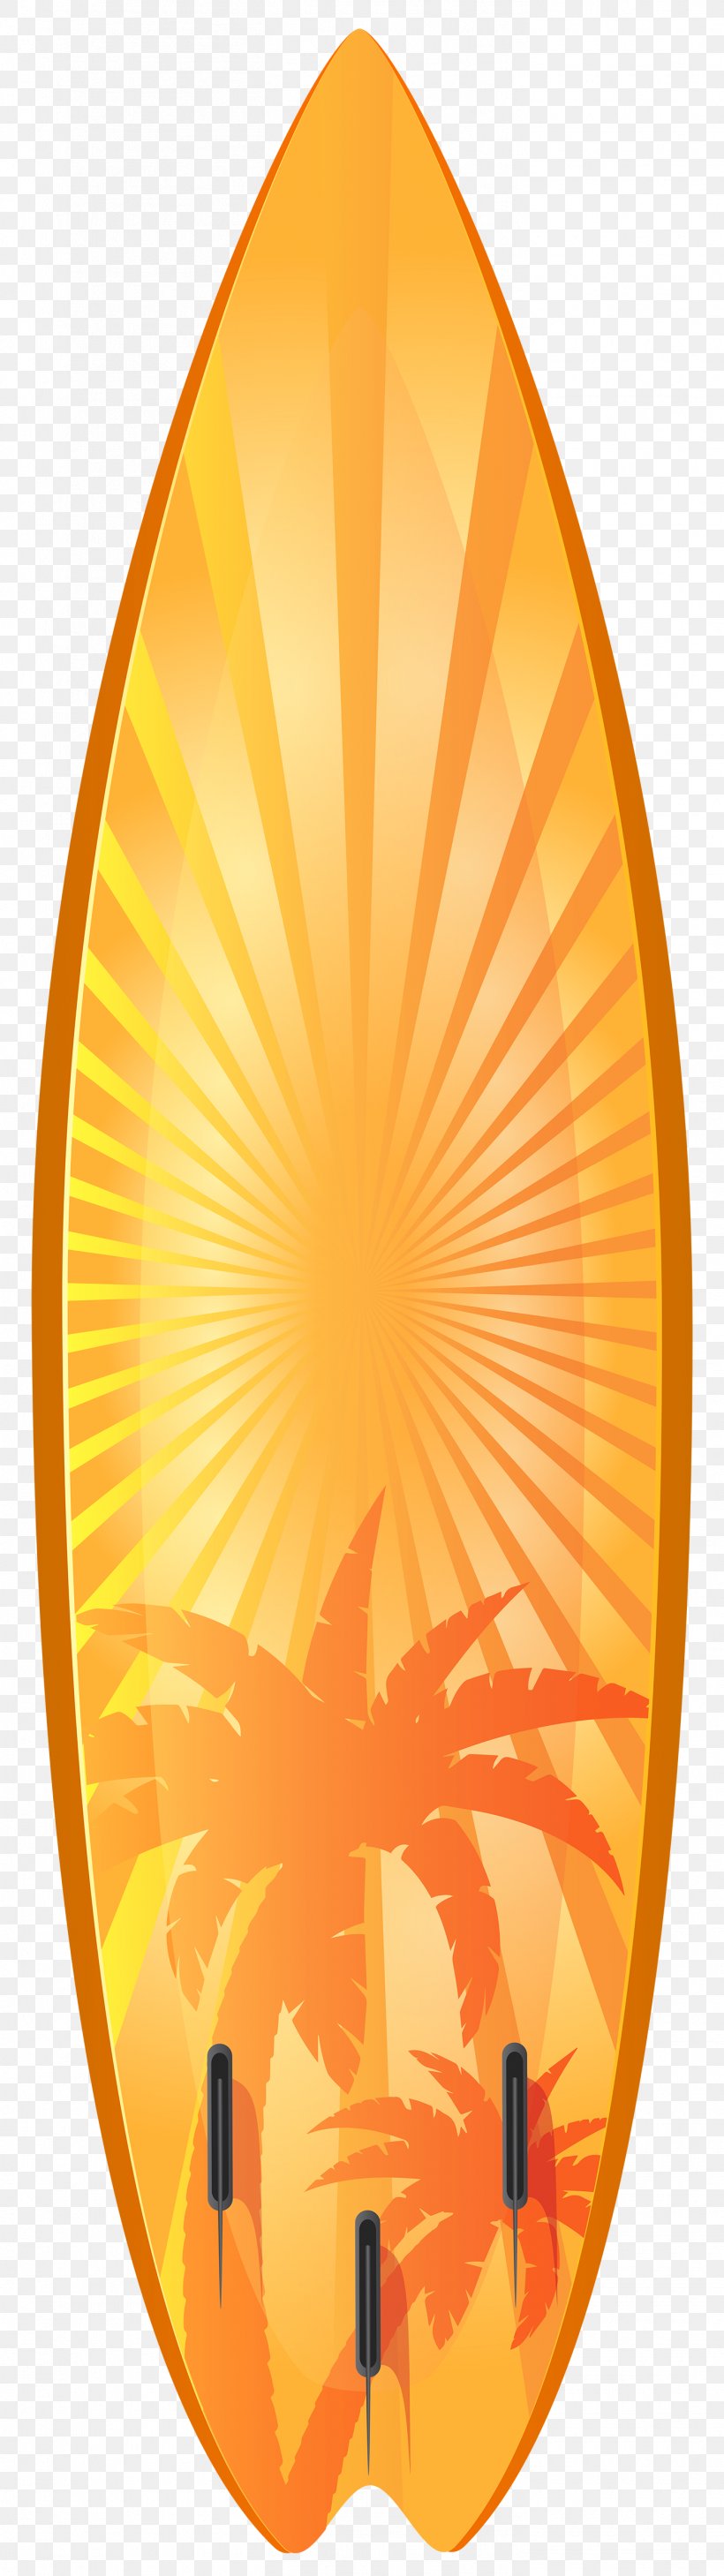 Surfboard Surfing Clip Art Png 1405x5000px Surfboard Document